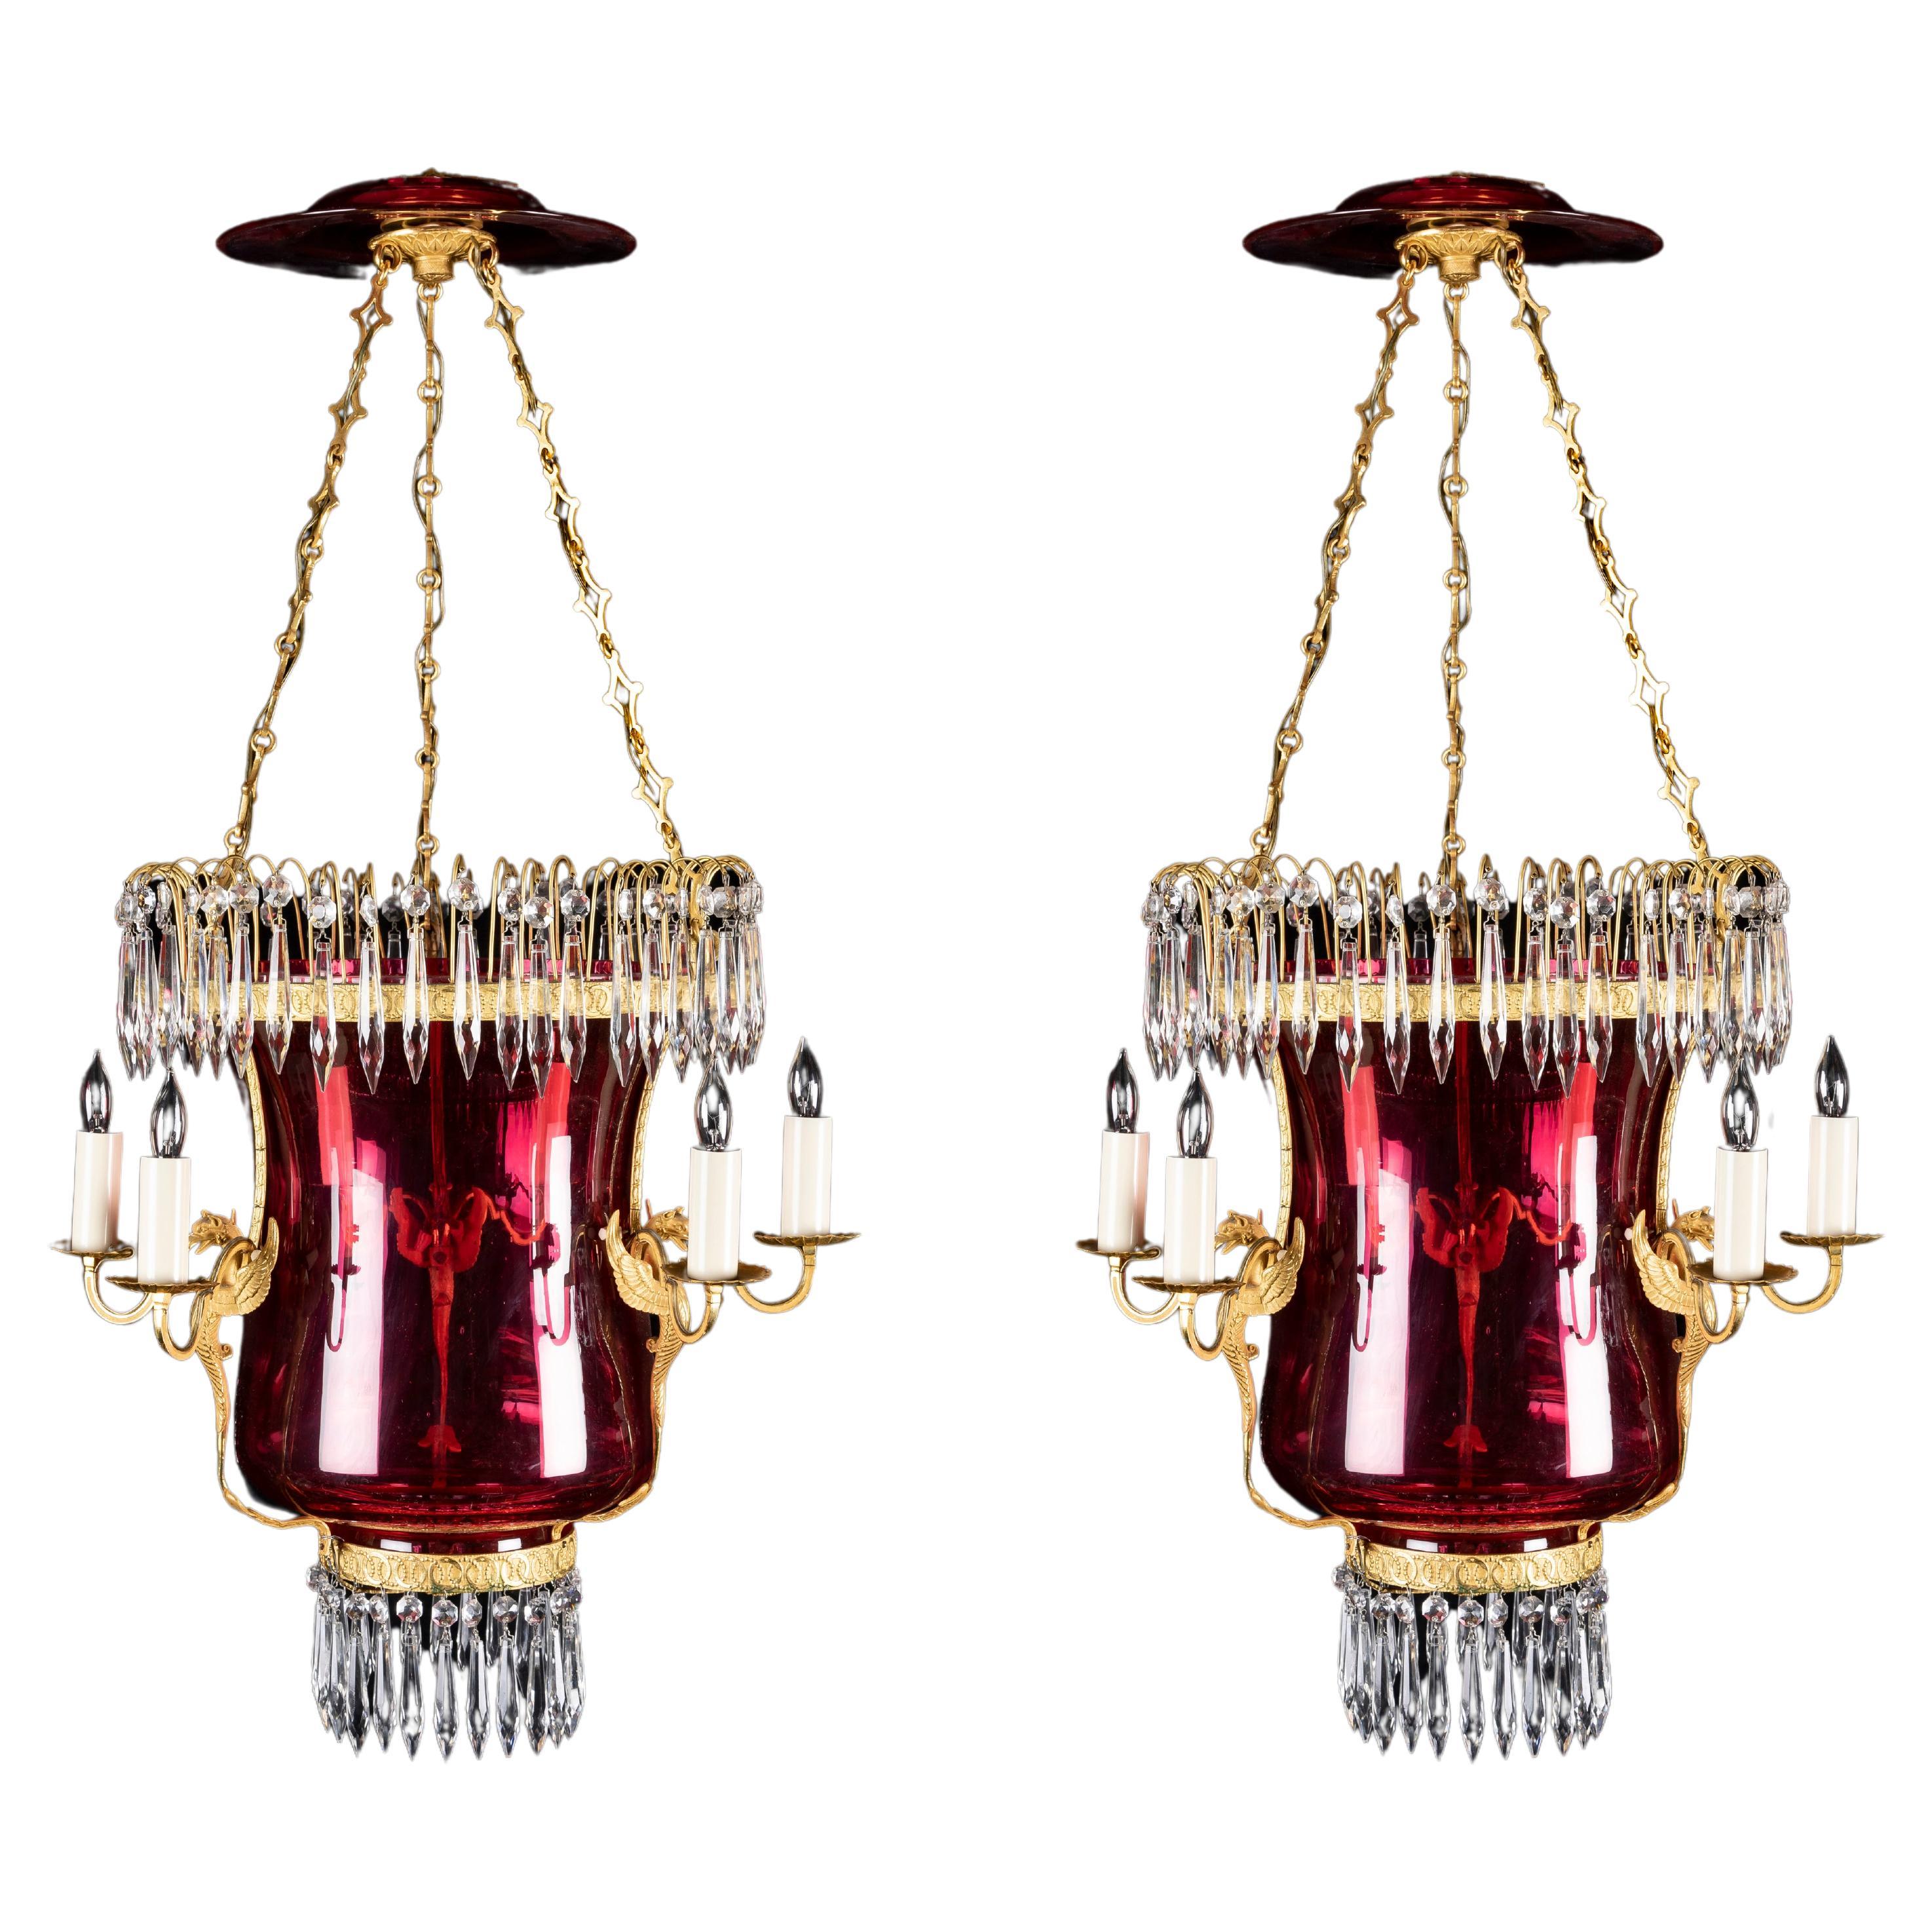 A Pair of Russian Neoclassical Cranberry glass & Gilt Bronze Lantern Chandeliers For Sale